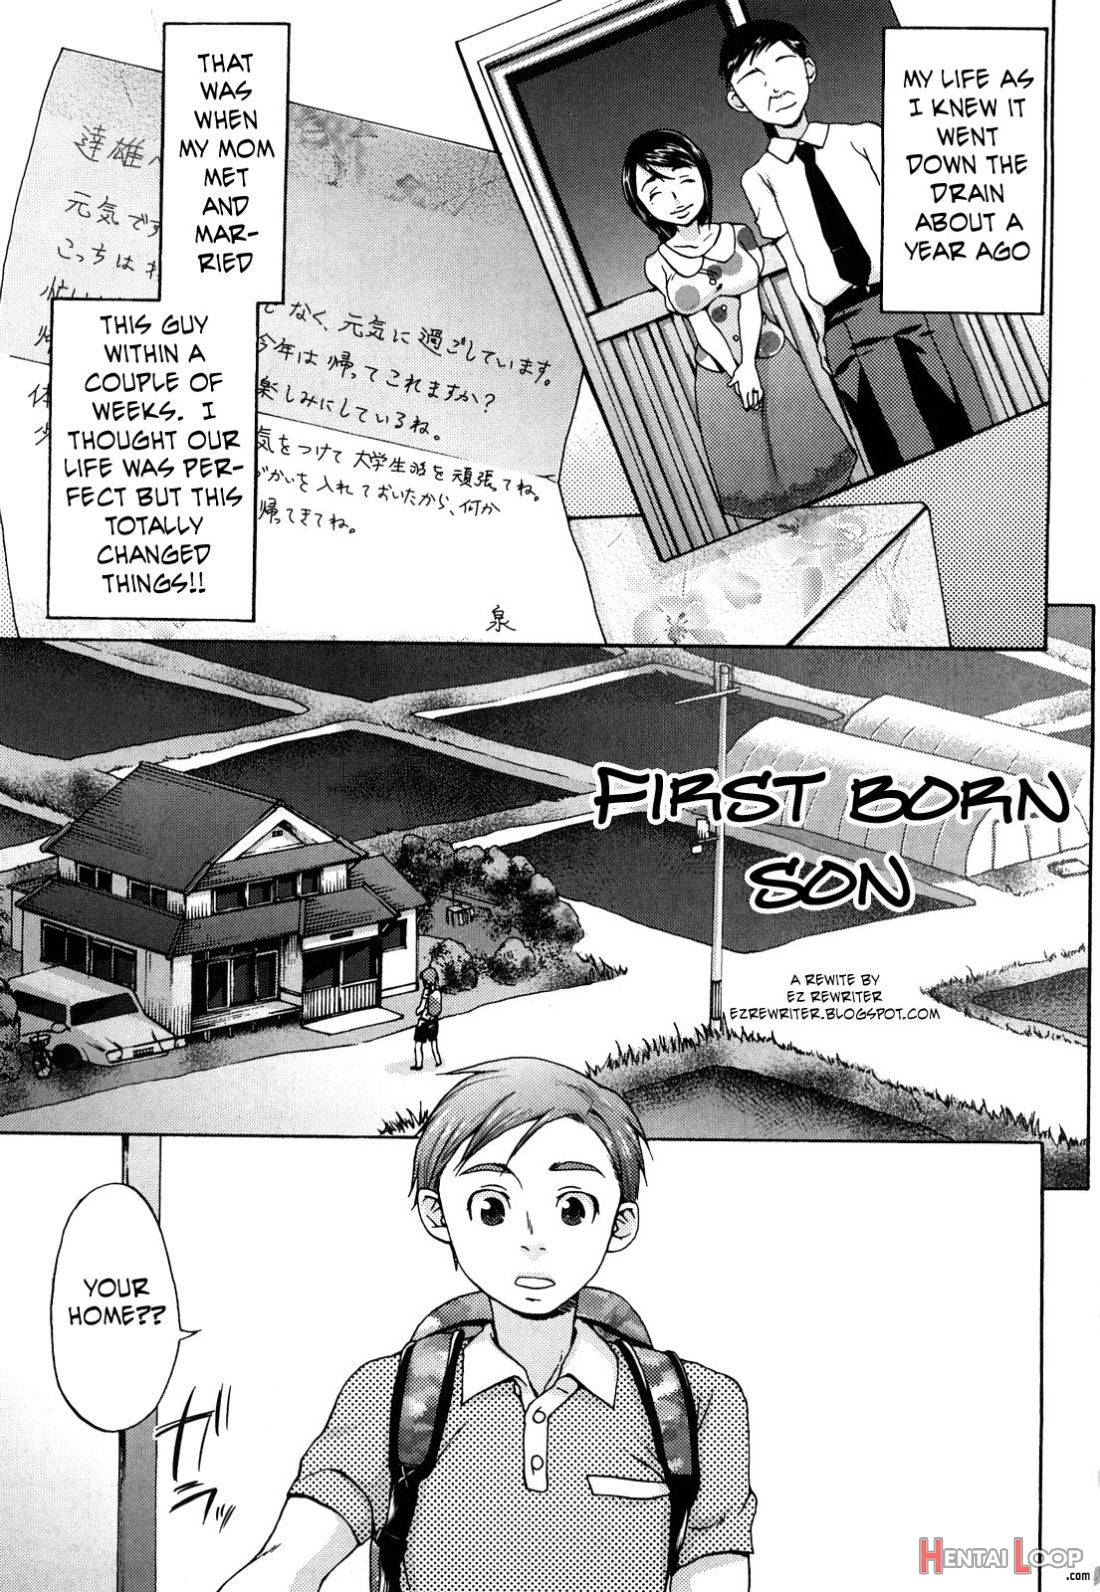 First Born Son page 1